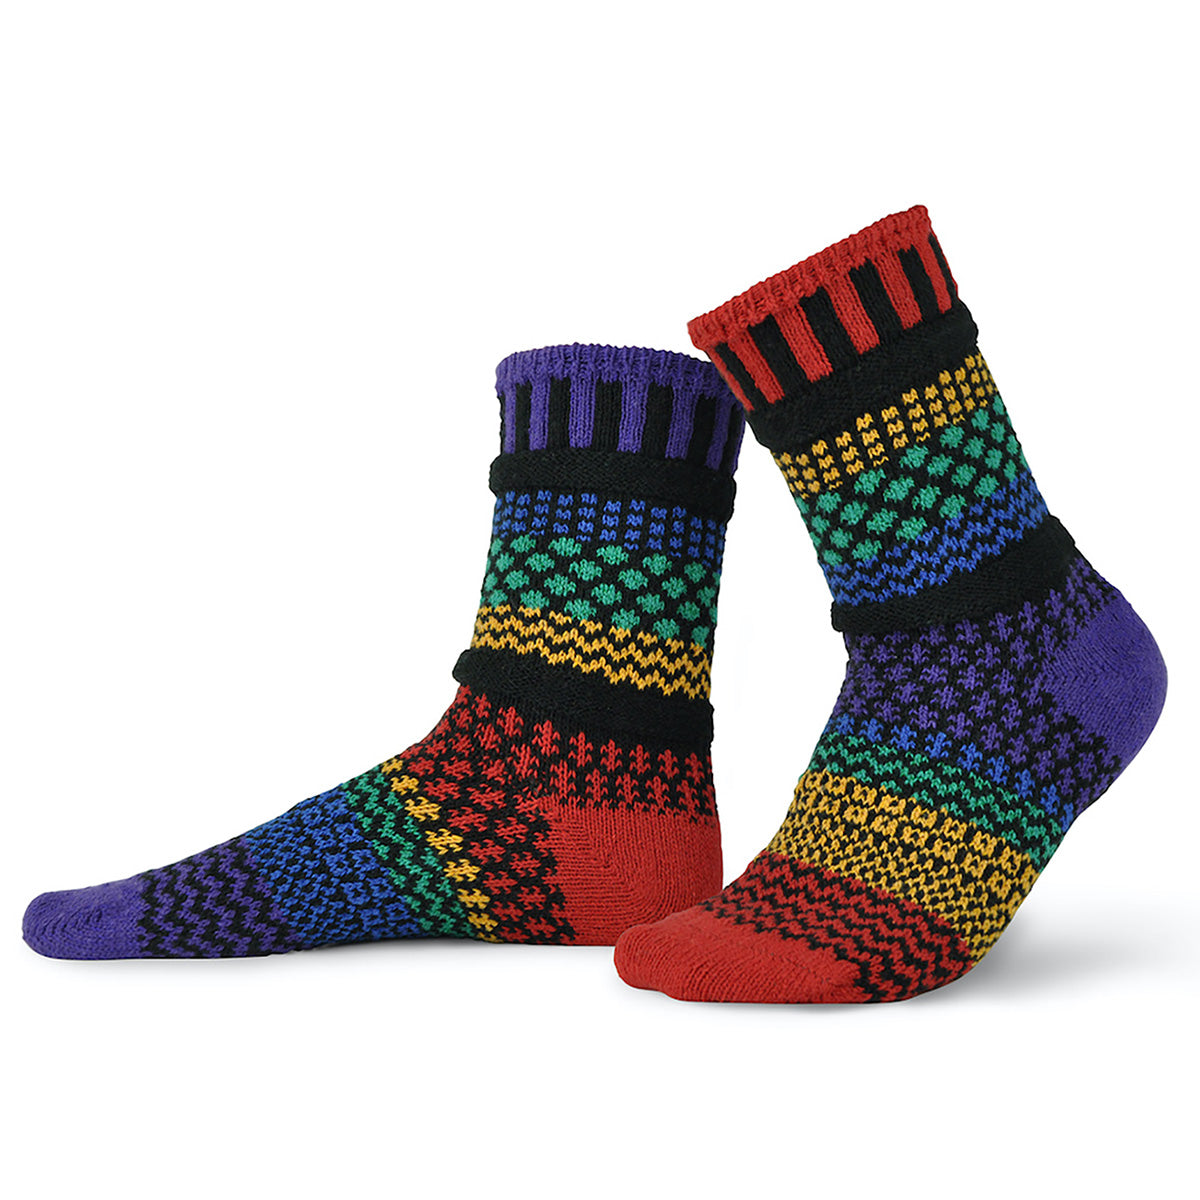 Mismatched socks feature funky patterns in bands of red, yellow, green, indigo, and purple.